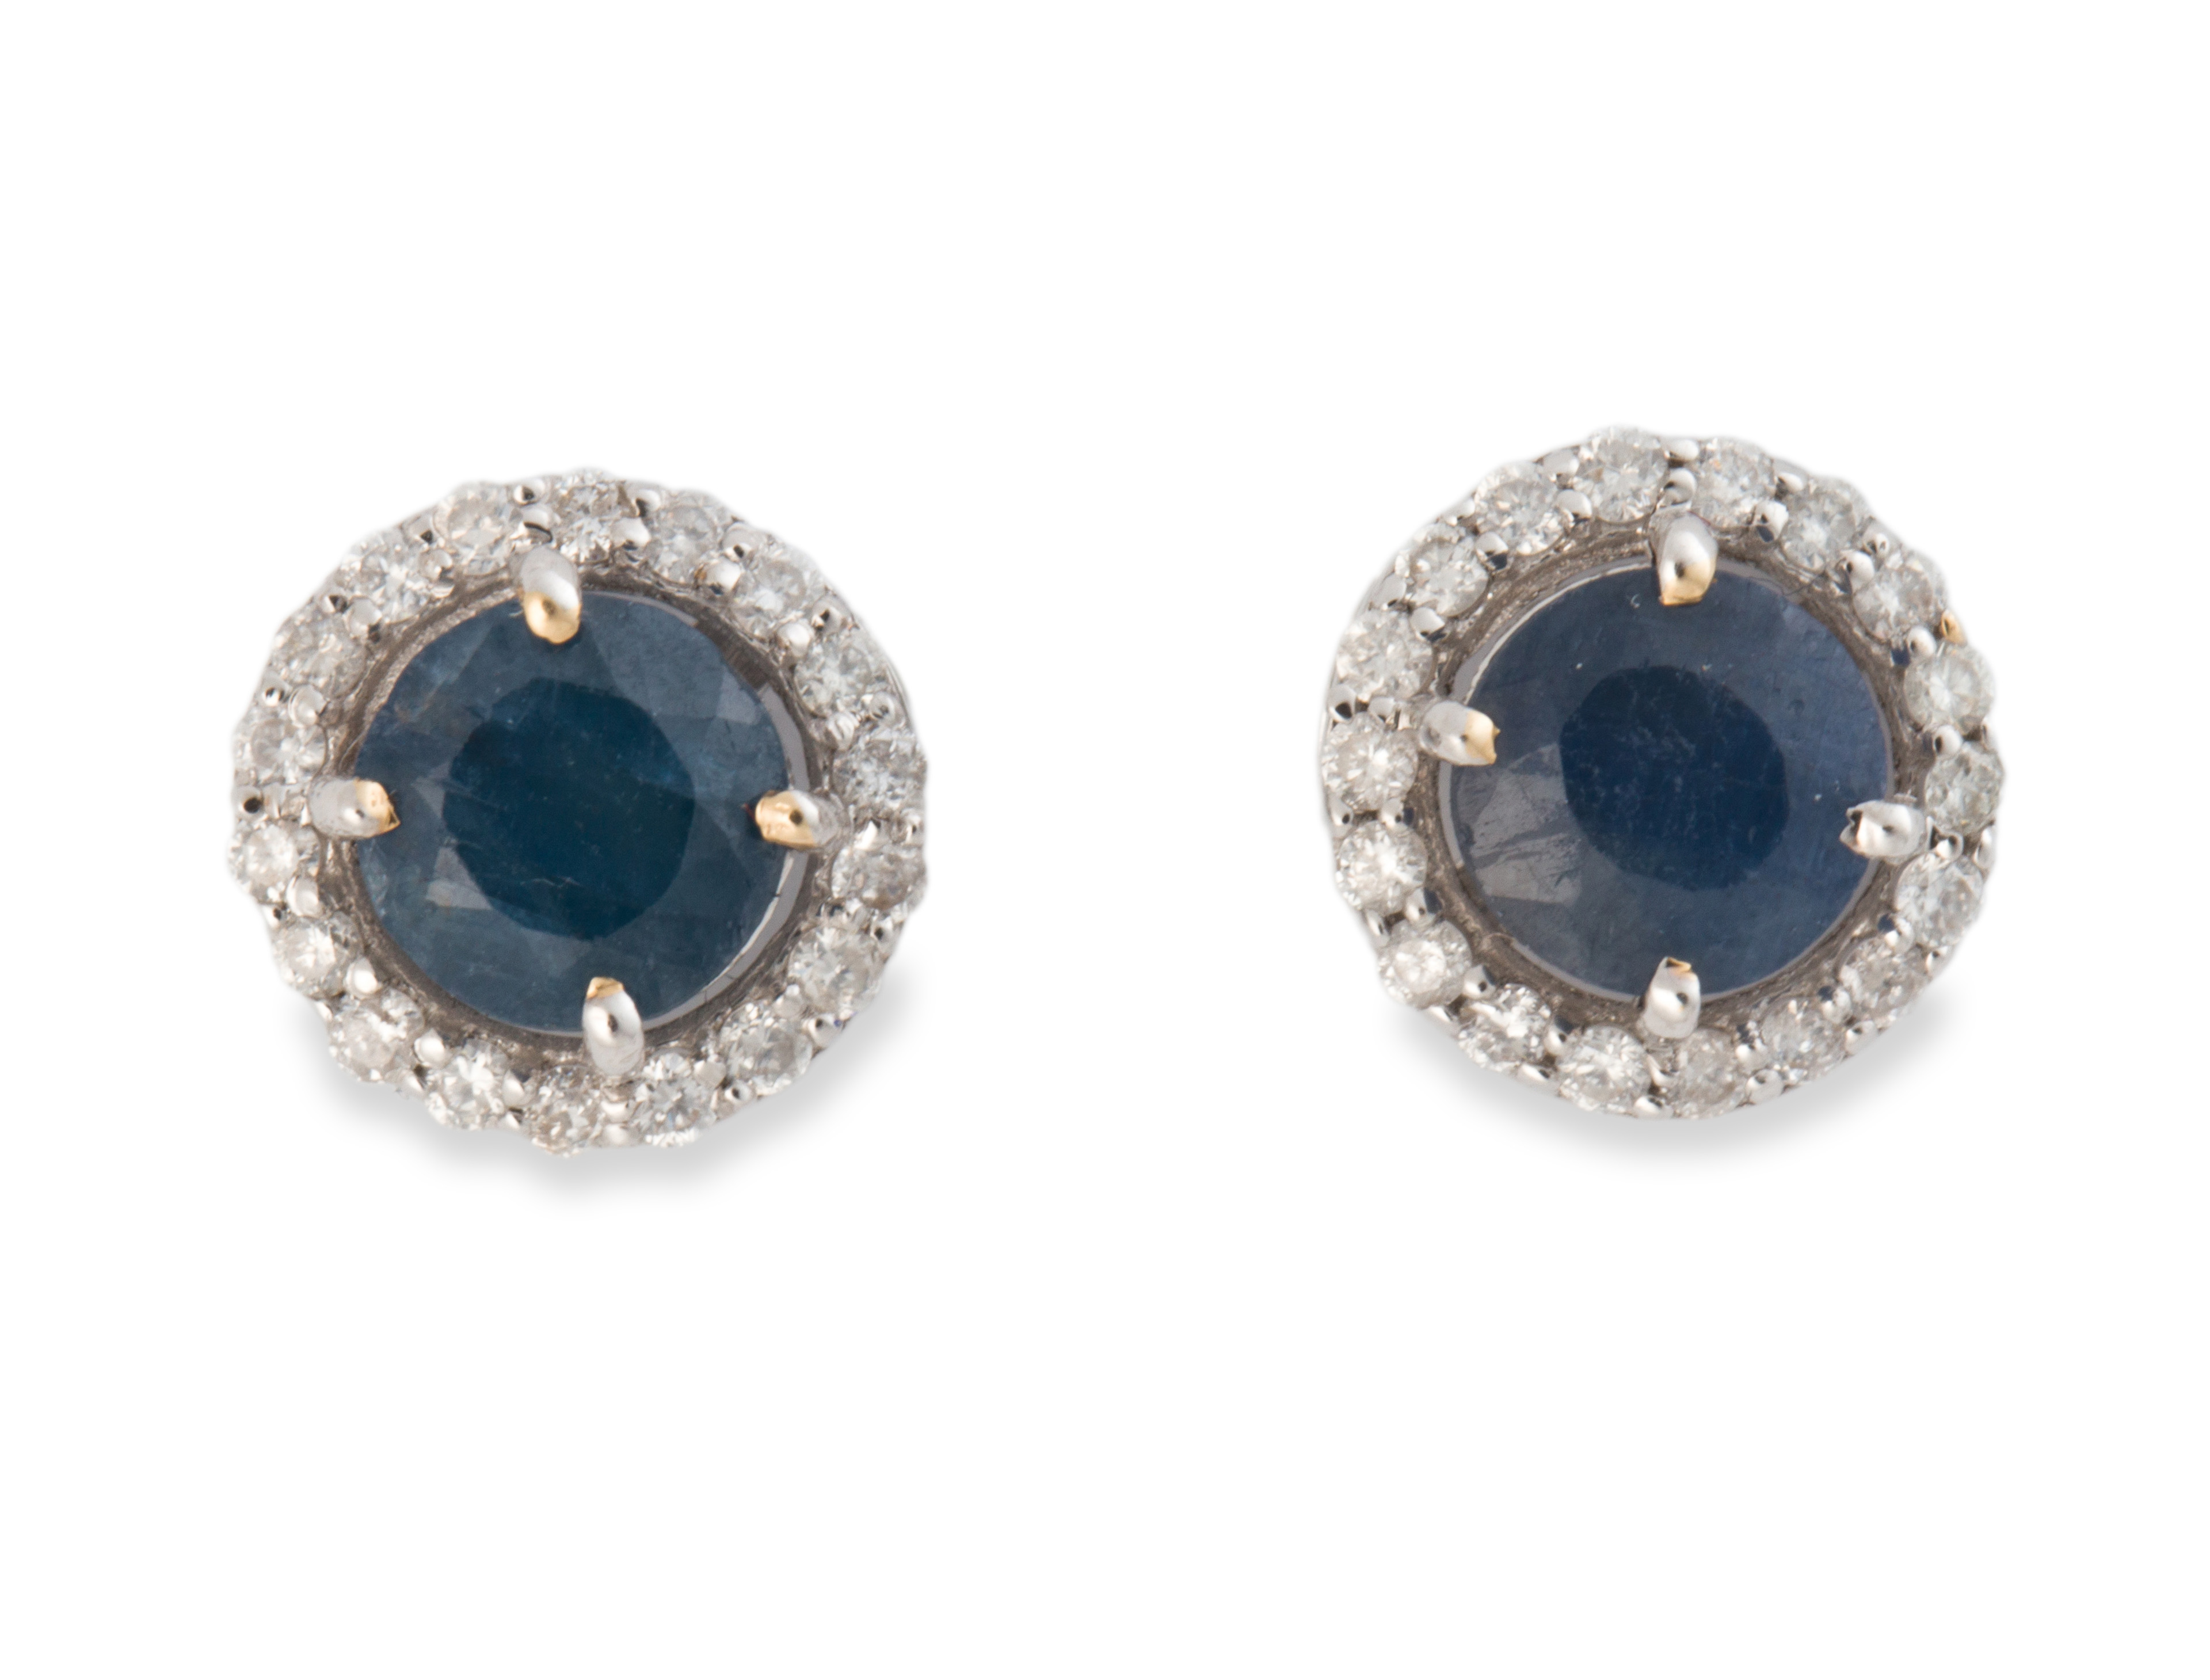 A PAIR OF SAPPHIRE, DIAMOND AND